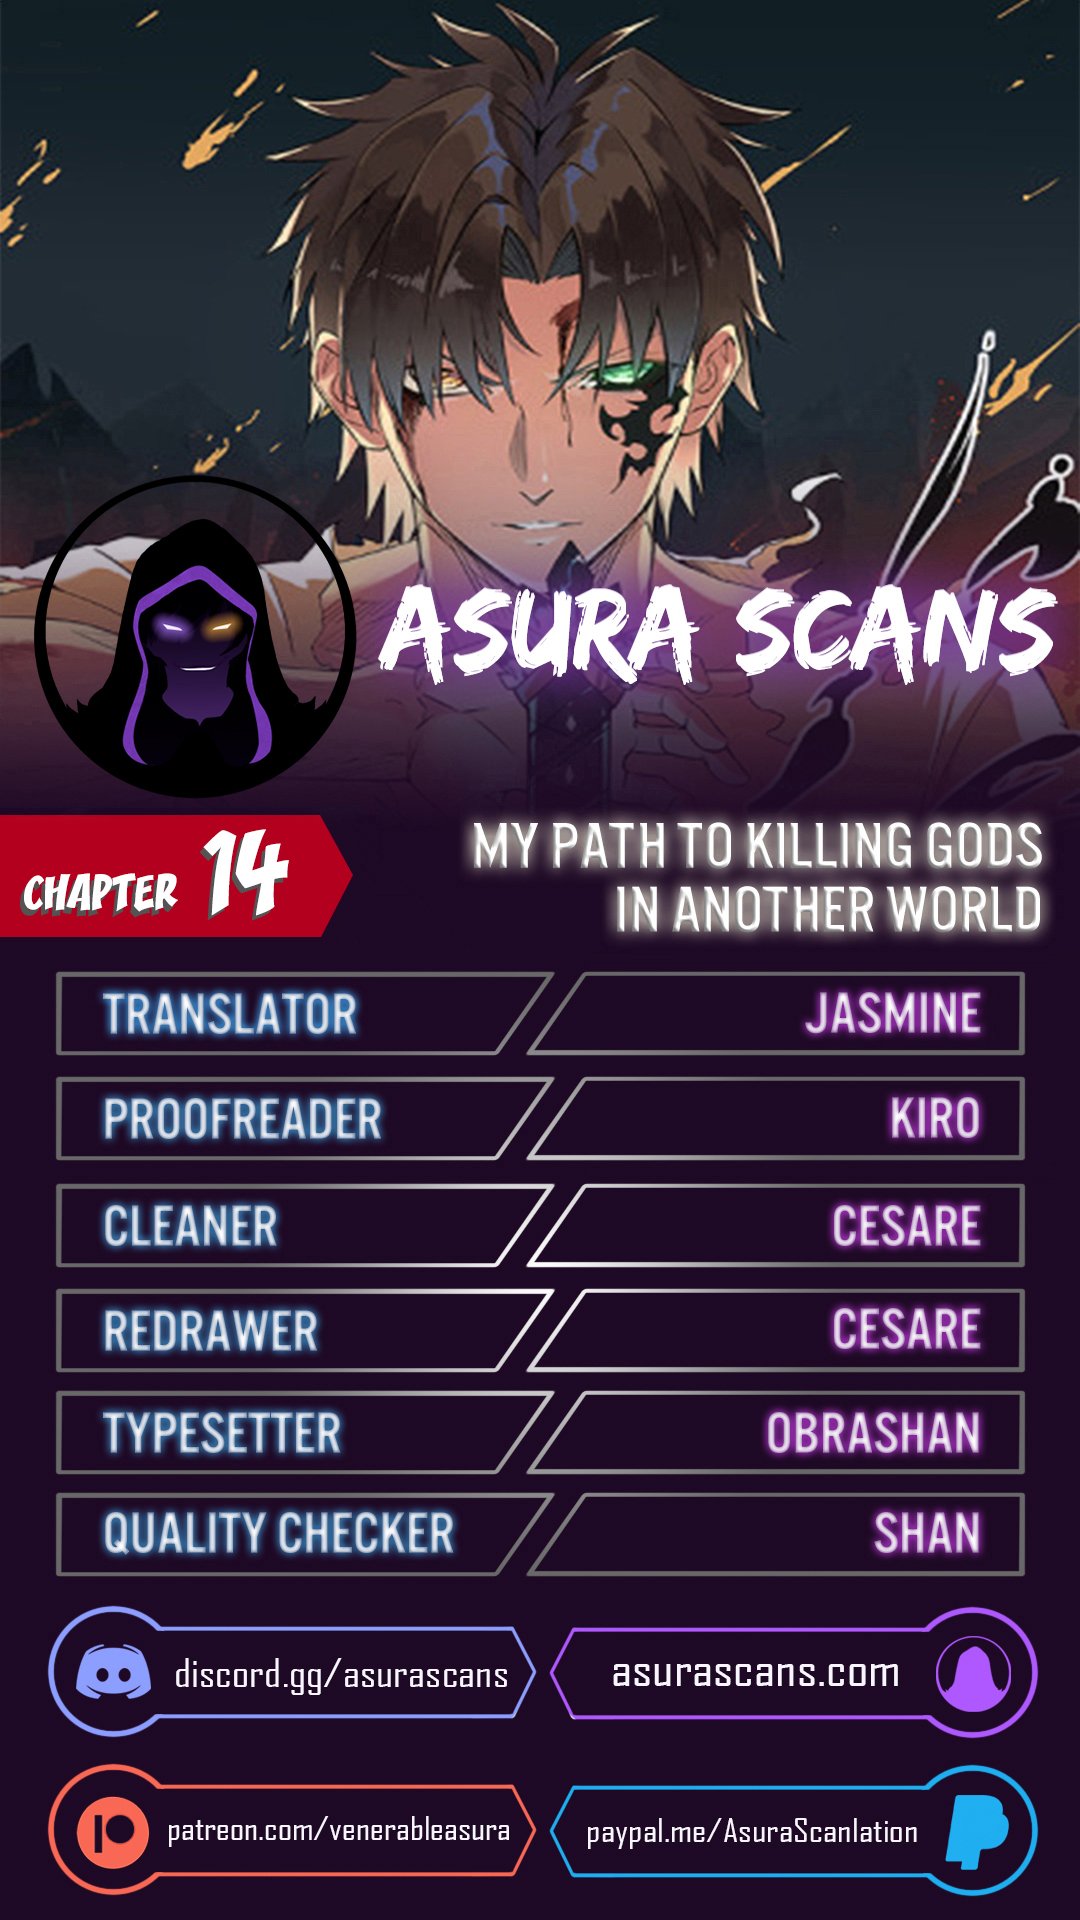 My Path to Killing Gods in Another World - Chapter 23165 - Image 1